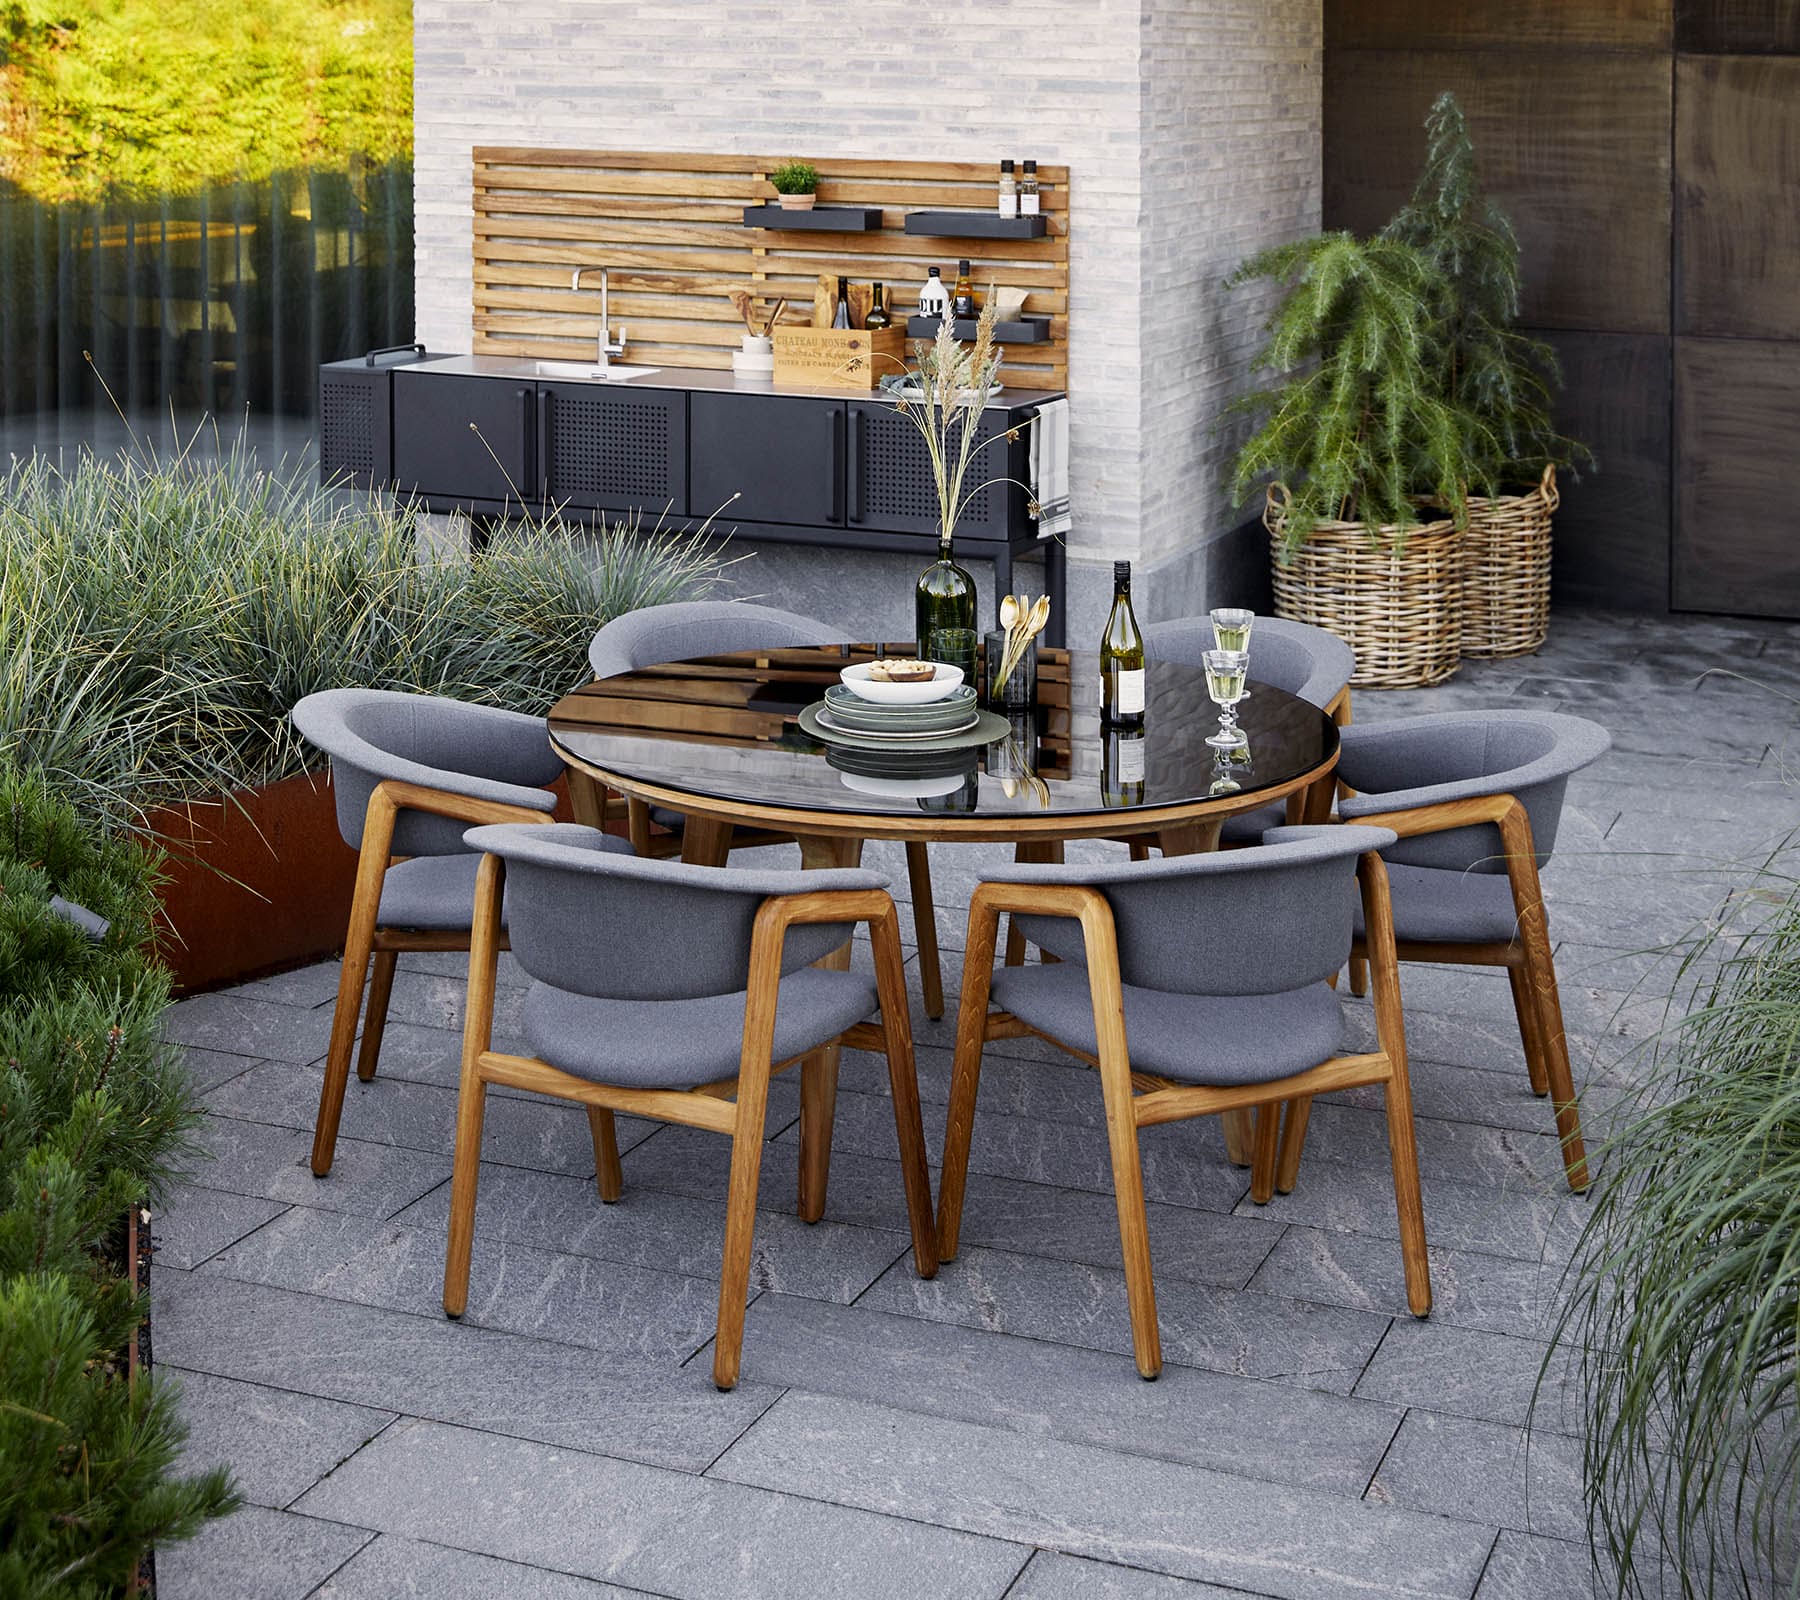 Boxhill's Luna Outdoor Dining Armchair Lifestyle image with teak round table with glass top at patio